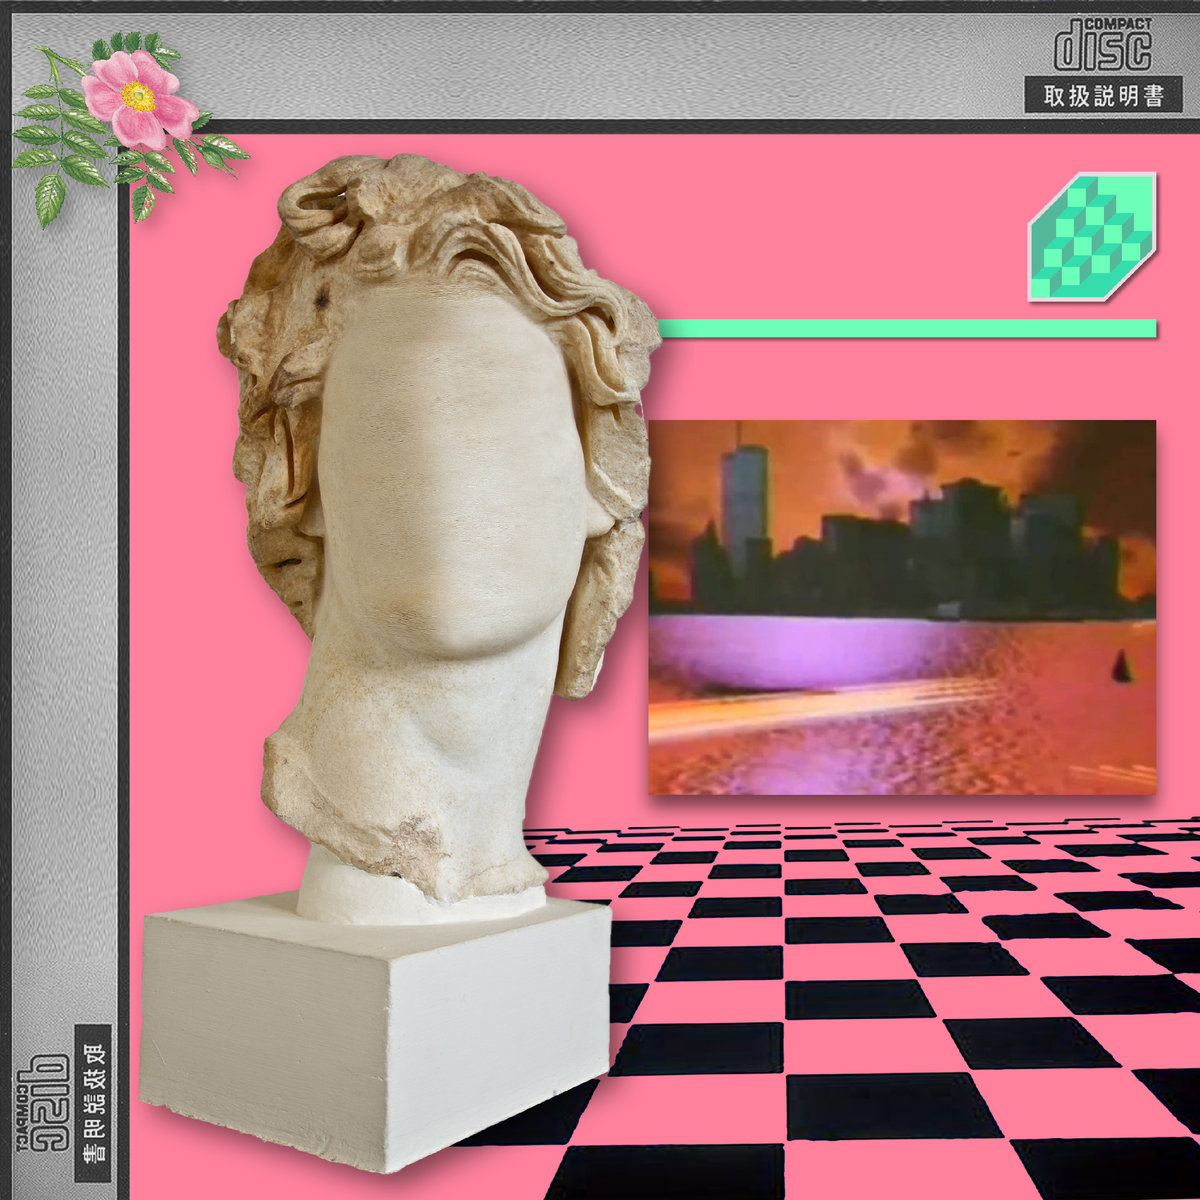 Guest Room Vaporwave And Memes For Valentine S The Cornell